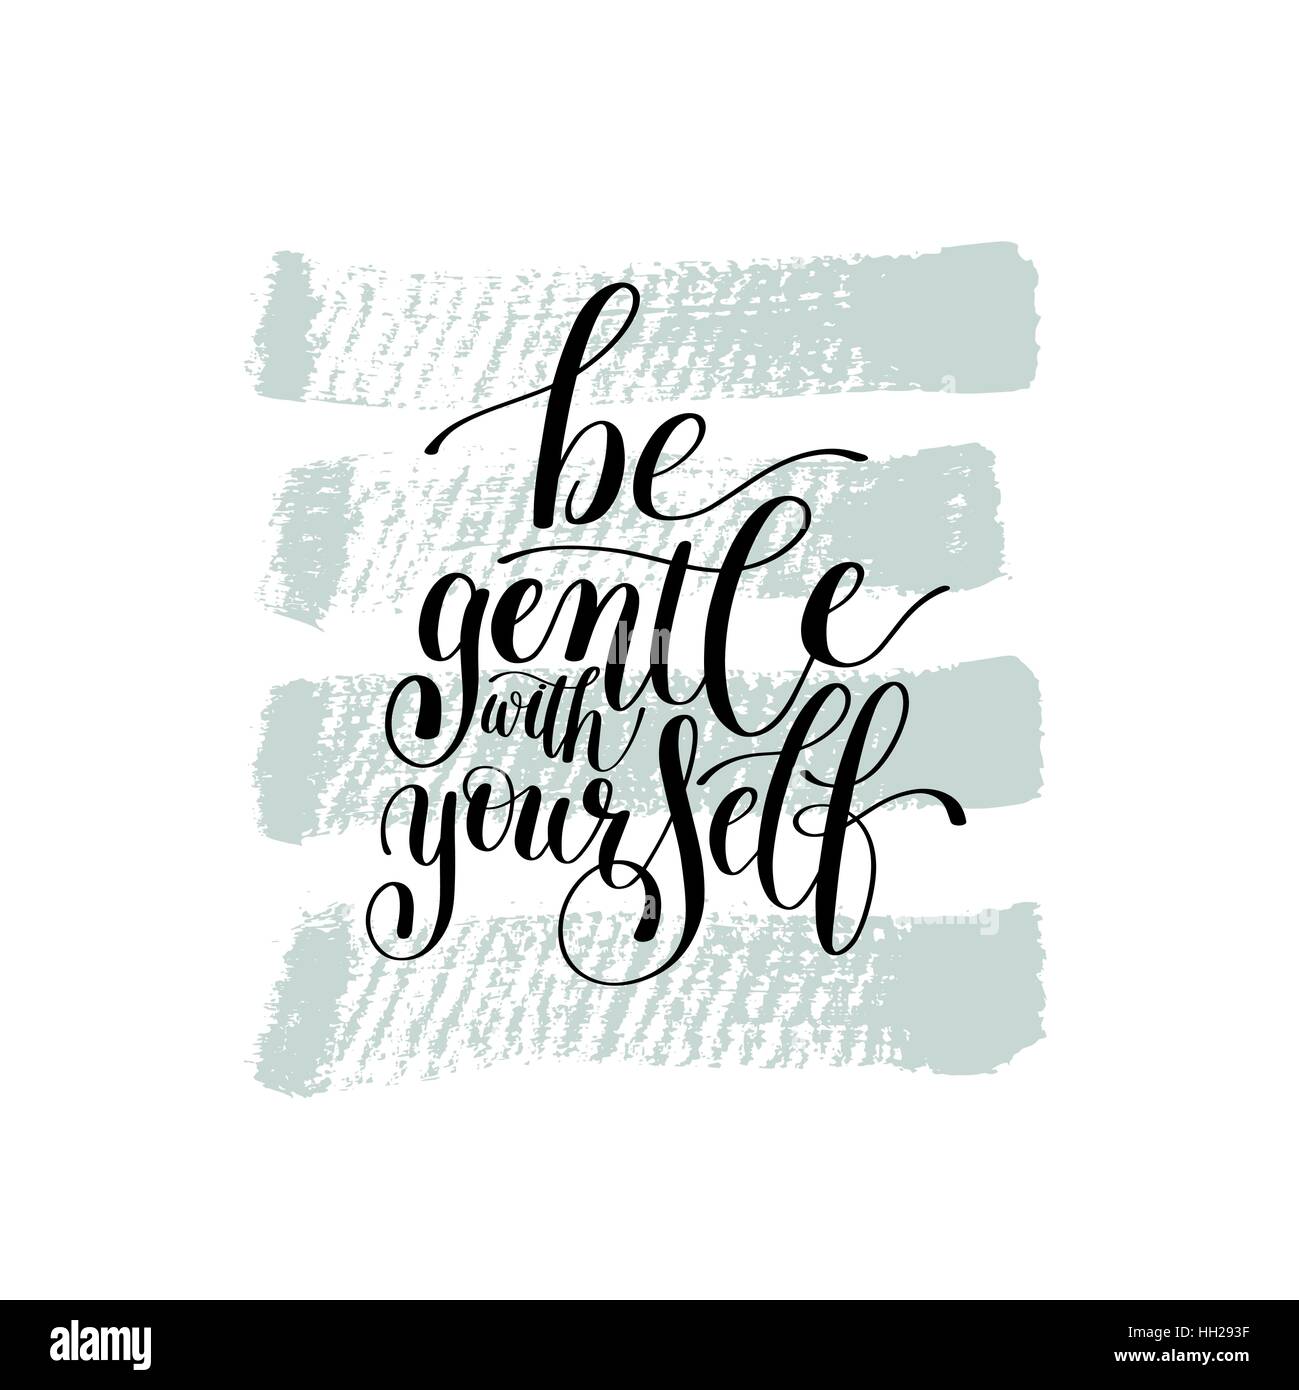 Be Gentle With Yourself. Motivational Quote. Hand Drawn Text Phr Stock Vector